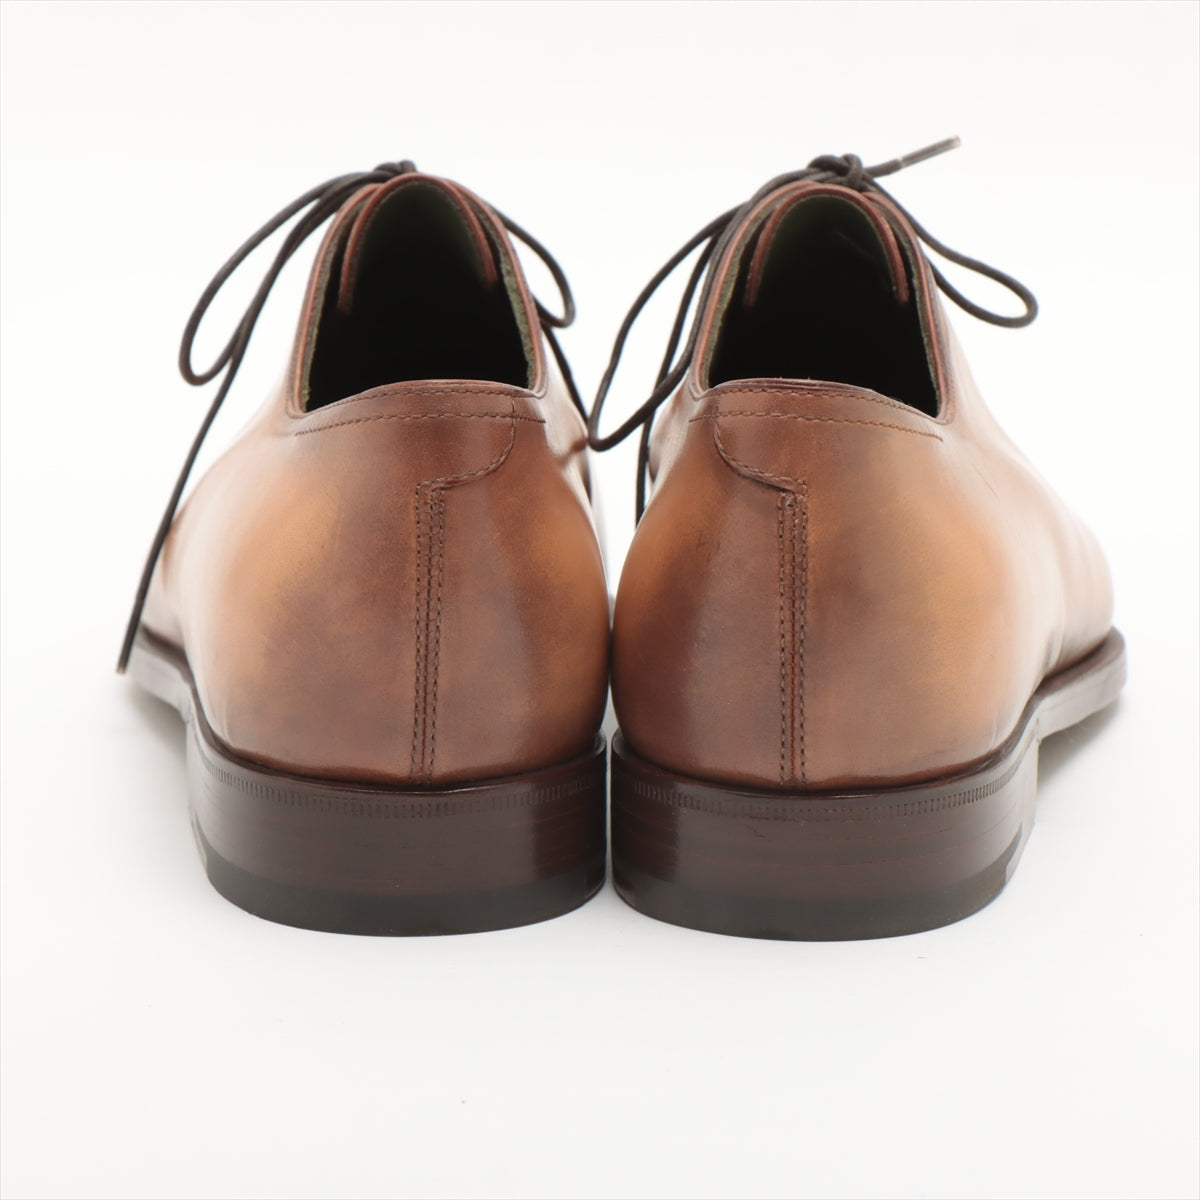 Berluti Alessandro Leather Leather shoes 5 1/2 Men's Brown Comes with a regular shoe tree